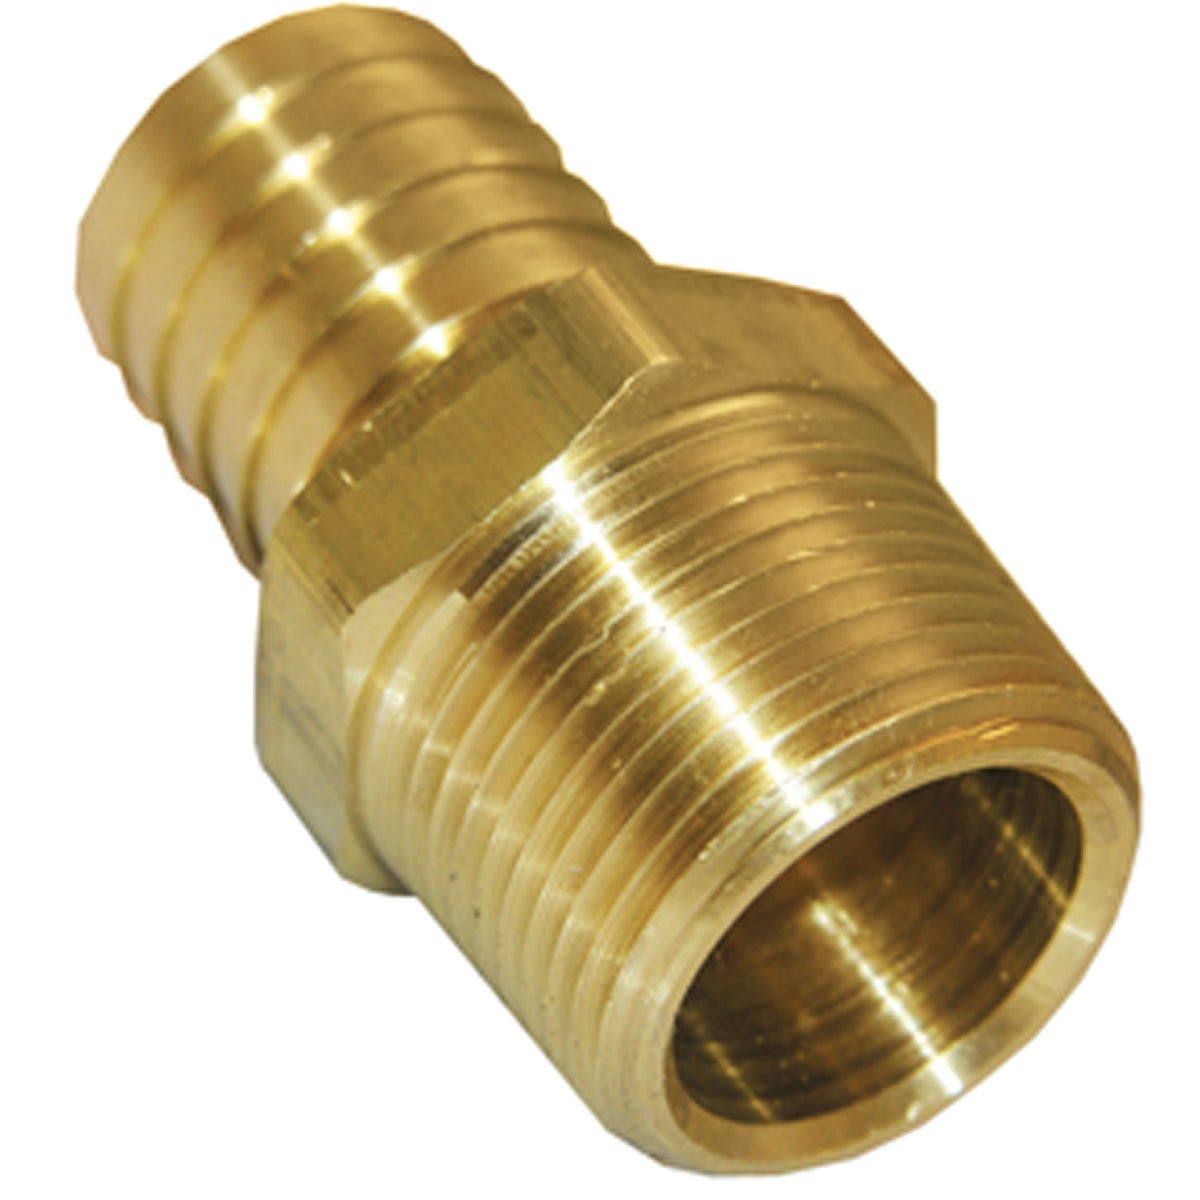 Lasco 3/8 In. MPT x 5/8 In. Brass Hose Barb Adapter